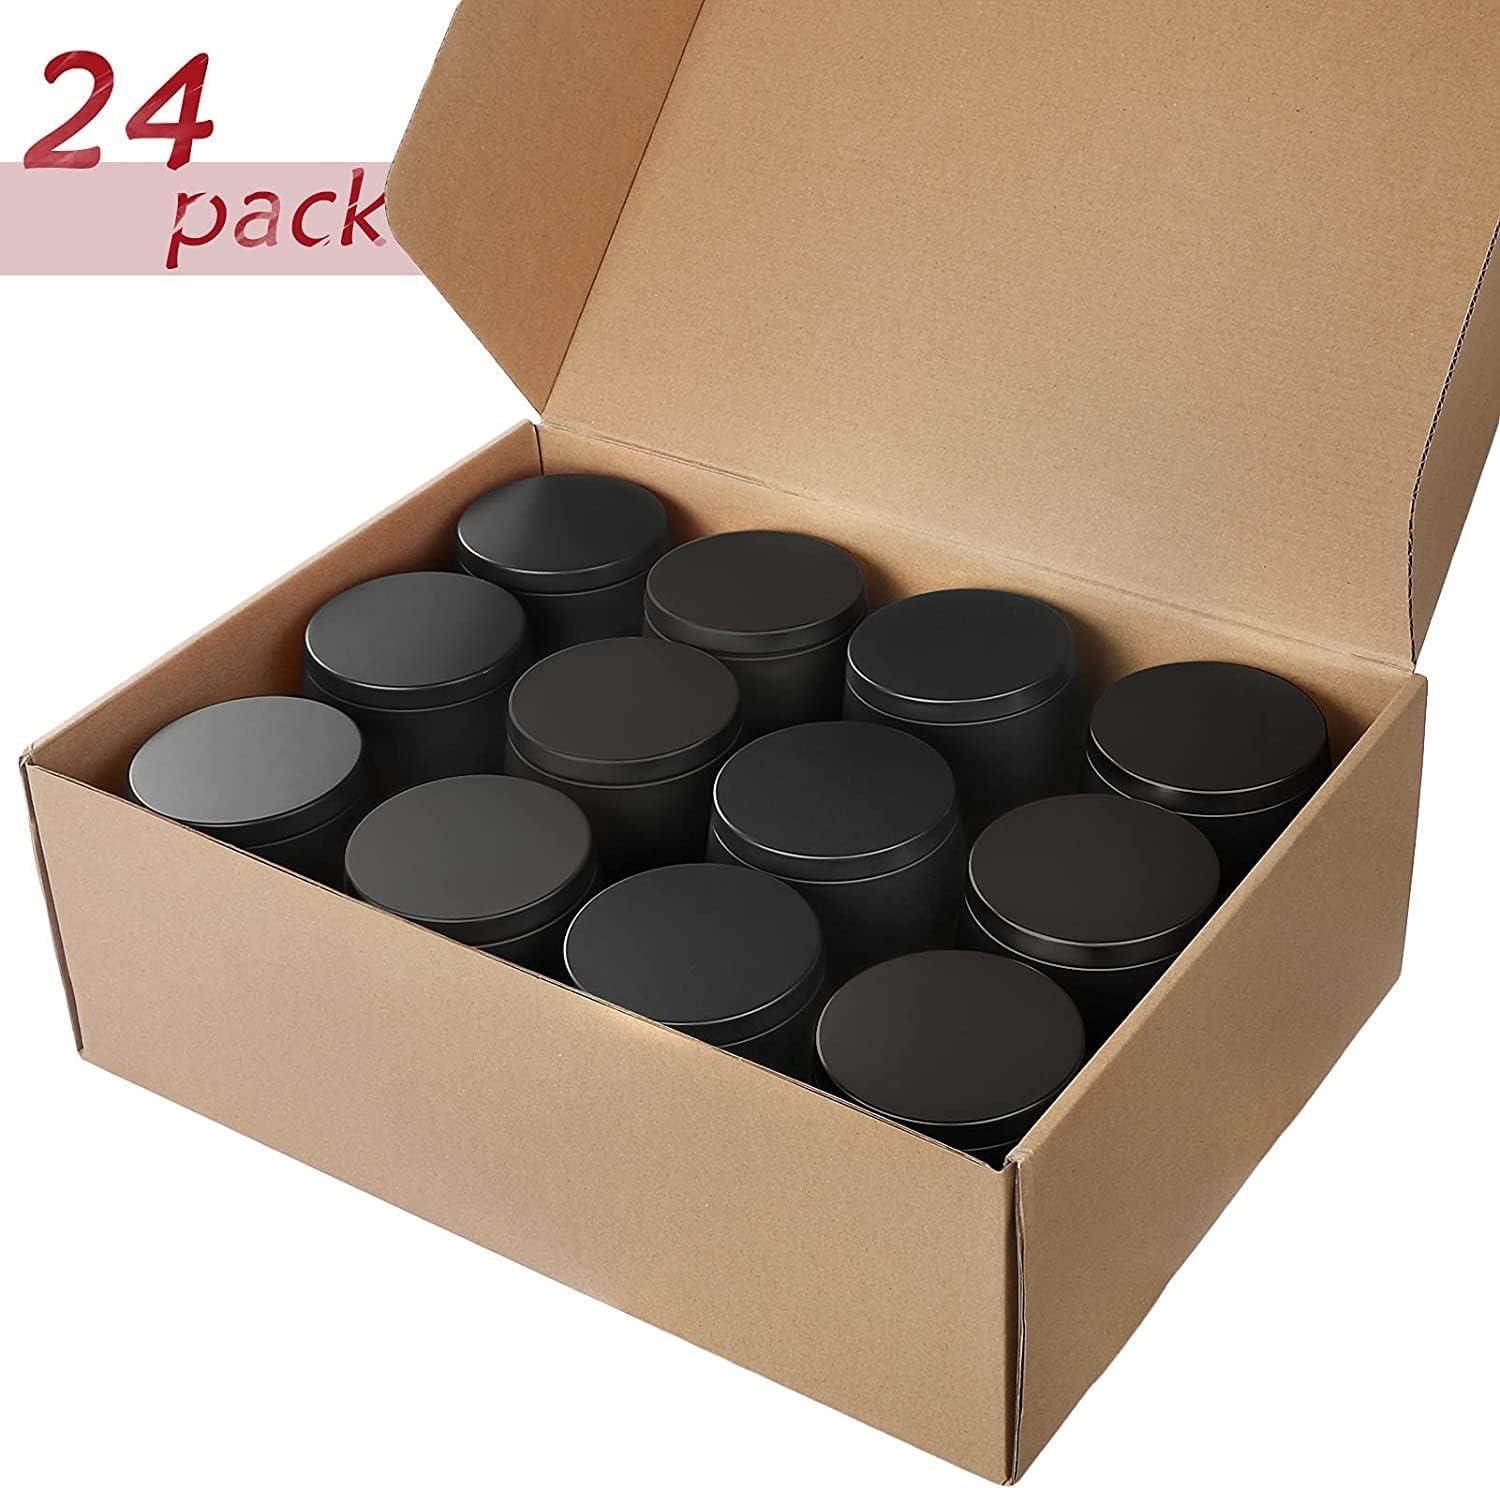 Bunhut Candle Tins,24 Pack 8oz Candle Tins for Making Candles,Bulk Candle  Jars with Lids,Candle Containers for DIY Candle Making,Black Candle  Tins,Empty Candle Jars for Making Candles (Black-8 oz) 